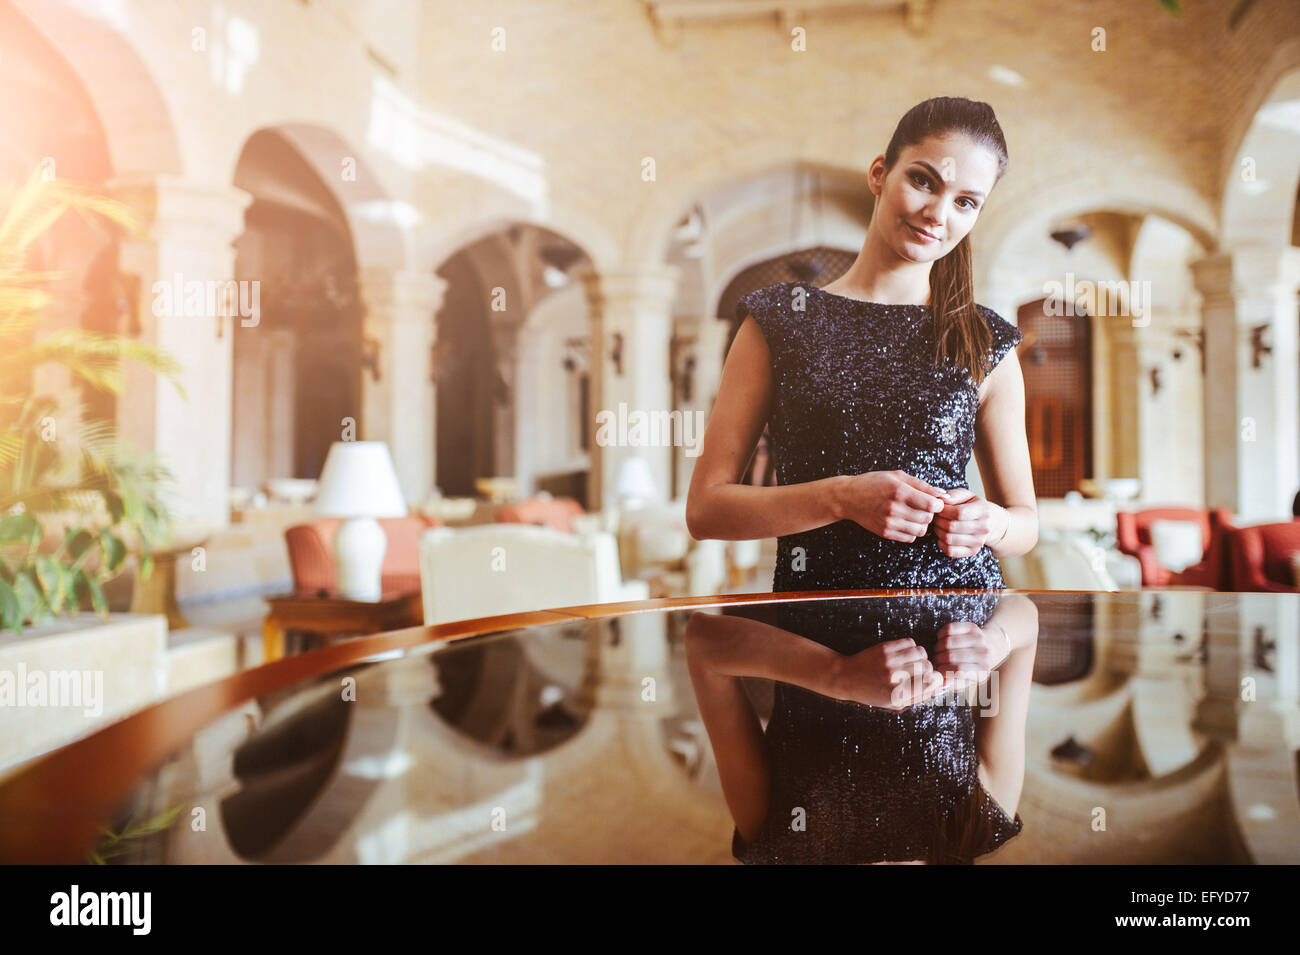 Luana Rodriguez - 'Miss Norddeutschland 2015' poses at Kempinski Hotel Soma Bay (Egypt), on February 11, 2015 in Soma Bay (Egypt). The 'Miss Germany' election 2015 will take place in the Europa Park Rust on 28.02.2015. Photo: picture alliance/Robert Schl Stock Photo